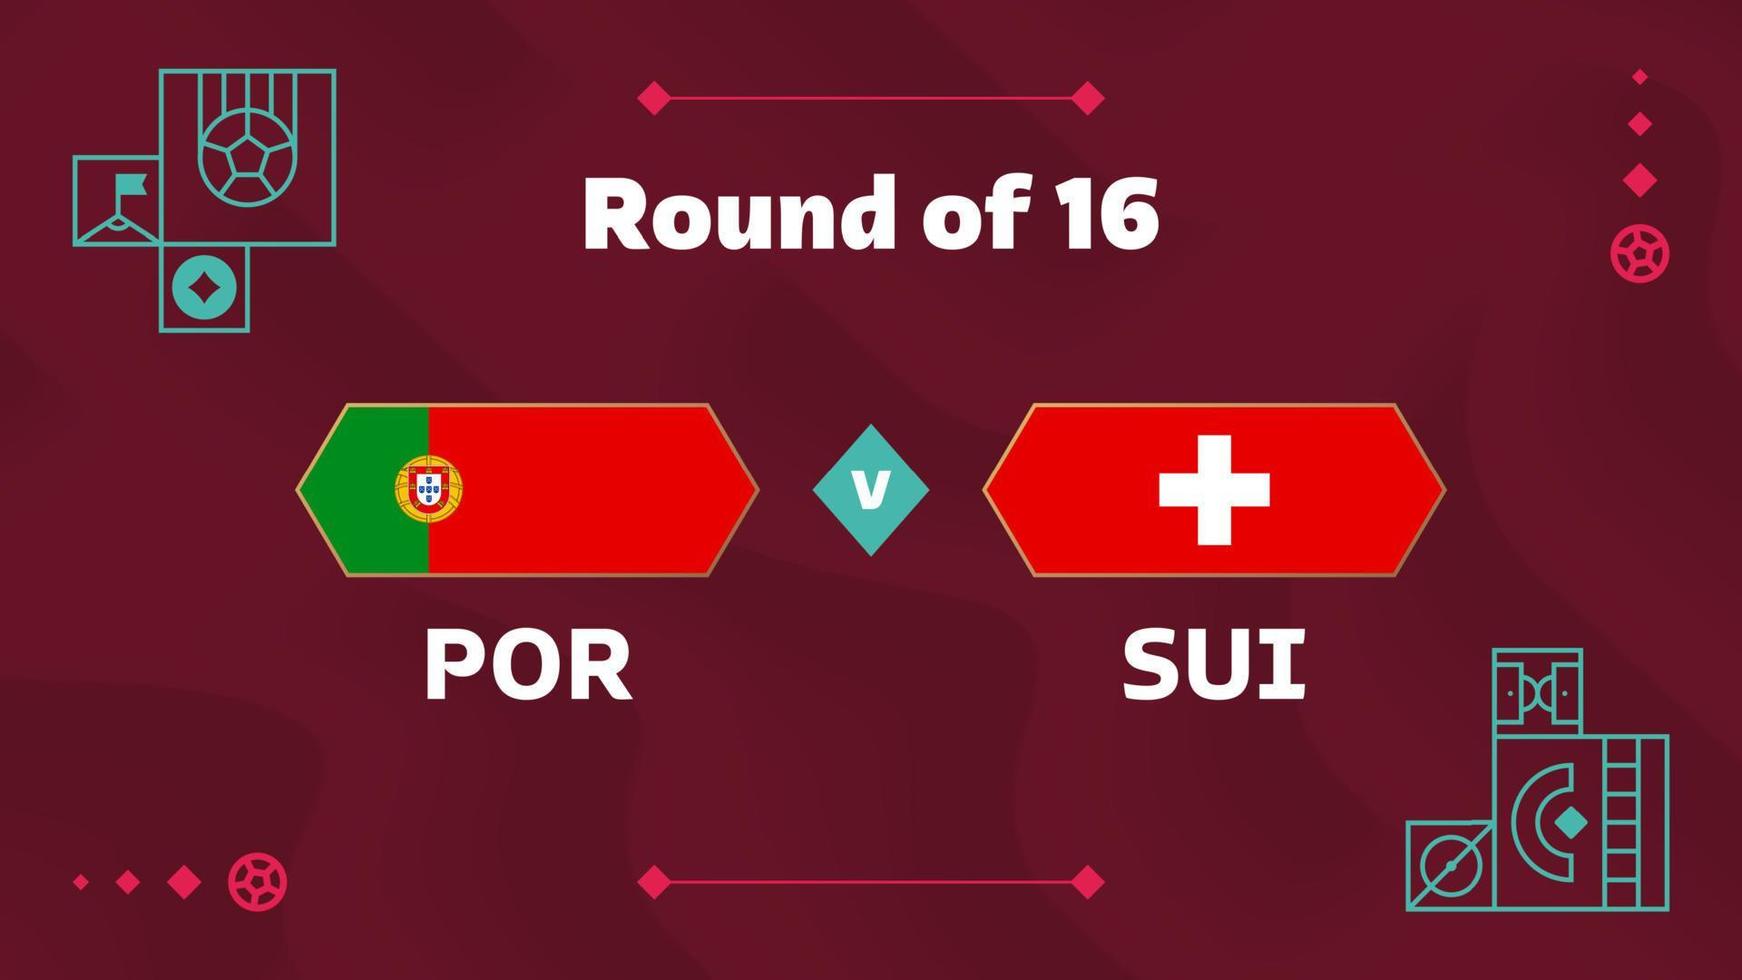 portugal switzerland playoff round of 16 match Football 2022. 2022 World Football championship match versus teams intro sport background, championship competition poster, vector